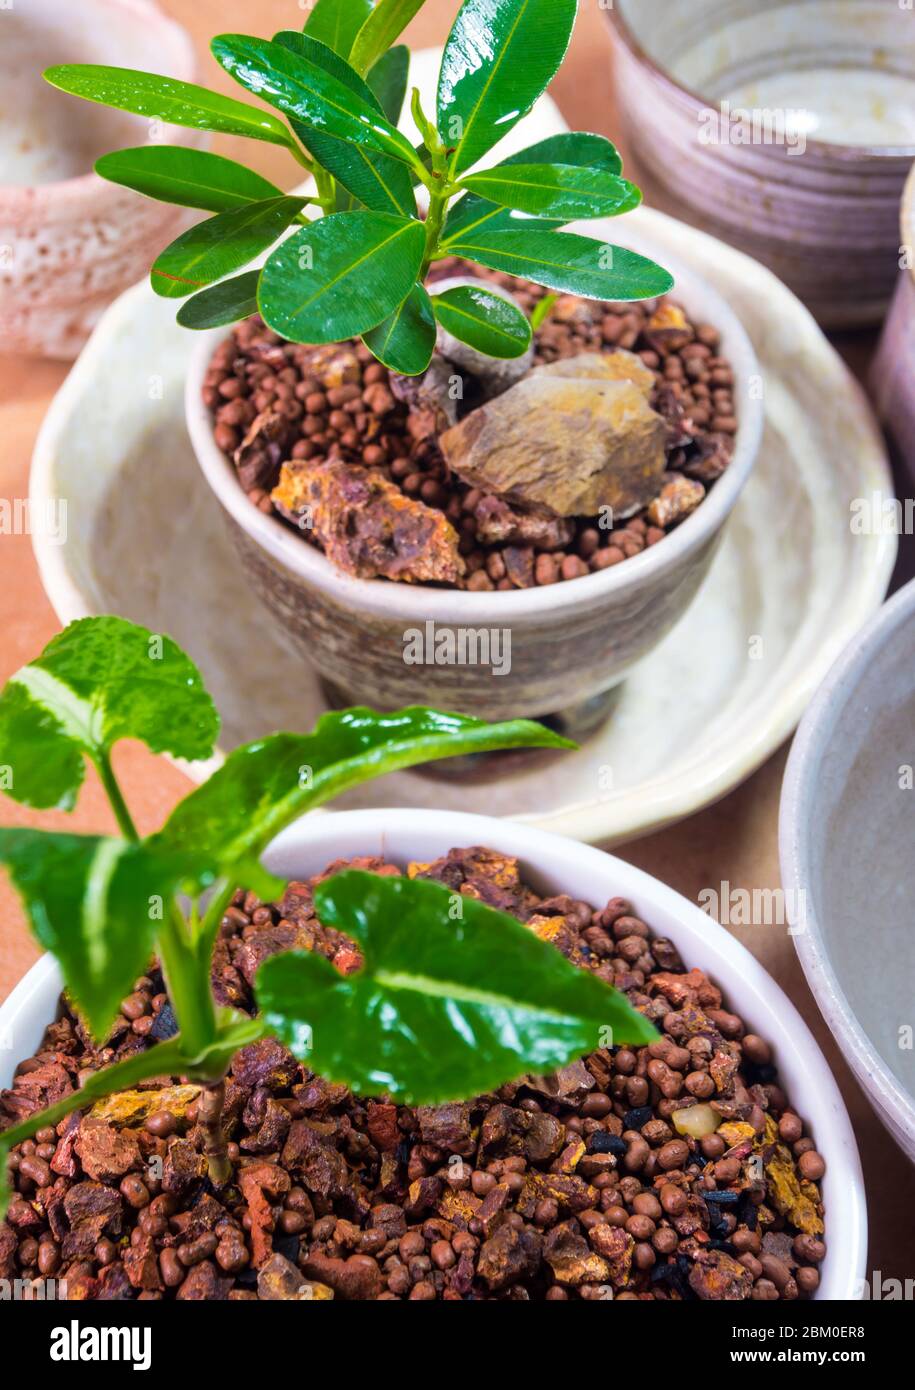 Houseplant 'Syngonium wendlandiiin' and  small 'Alexandria laurelthe' in the ceramic pots adapted from ceramic bowls Stock Photo